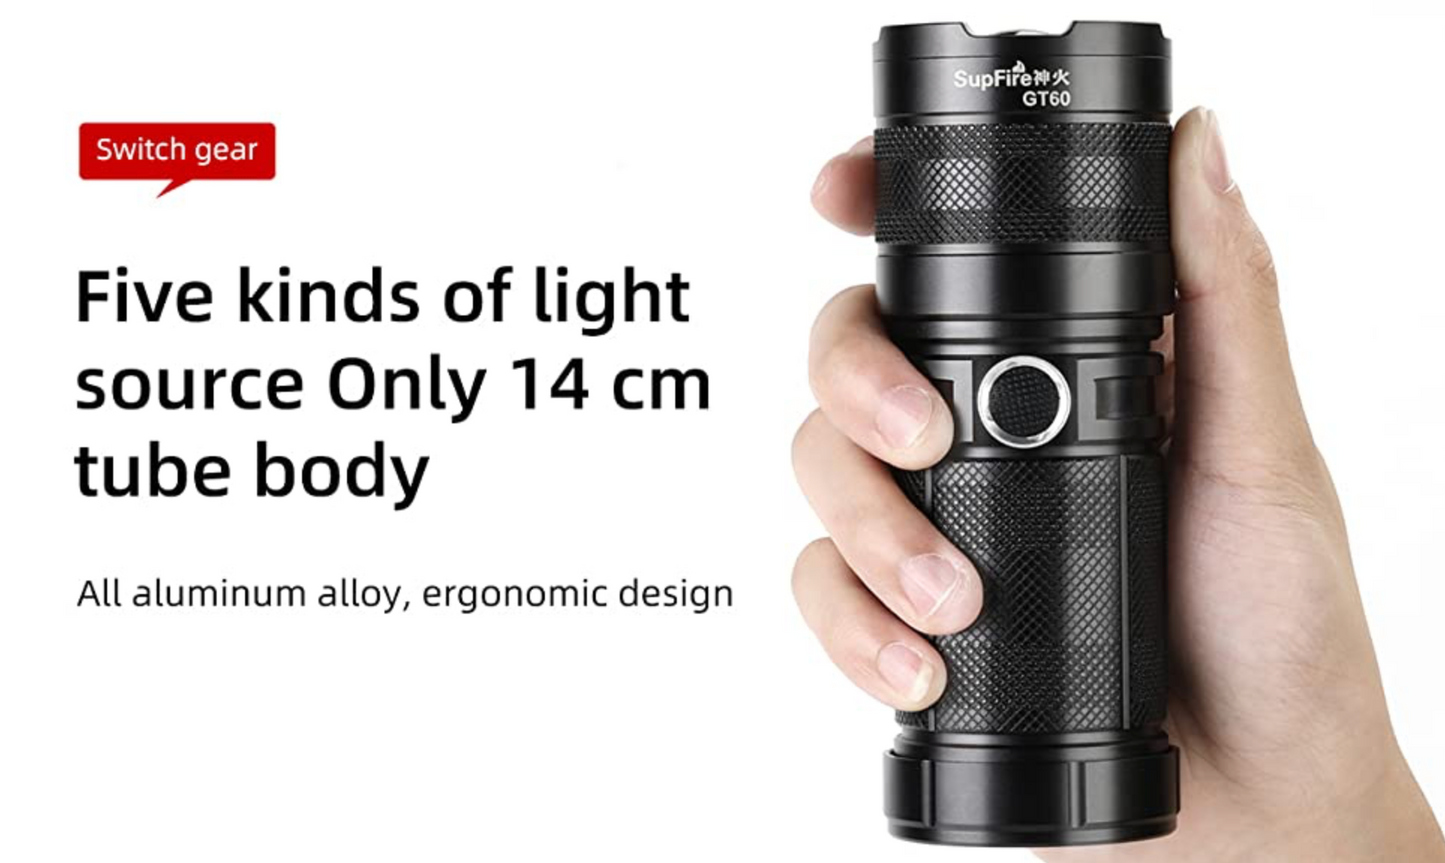 SuperFire GT60 Rechargeable LED USB Flashlight